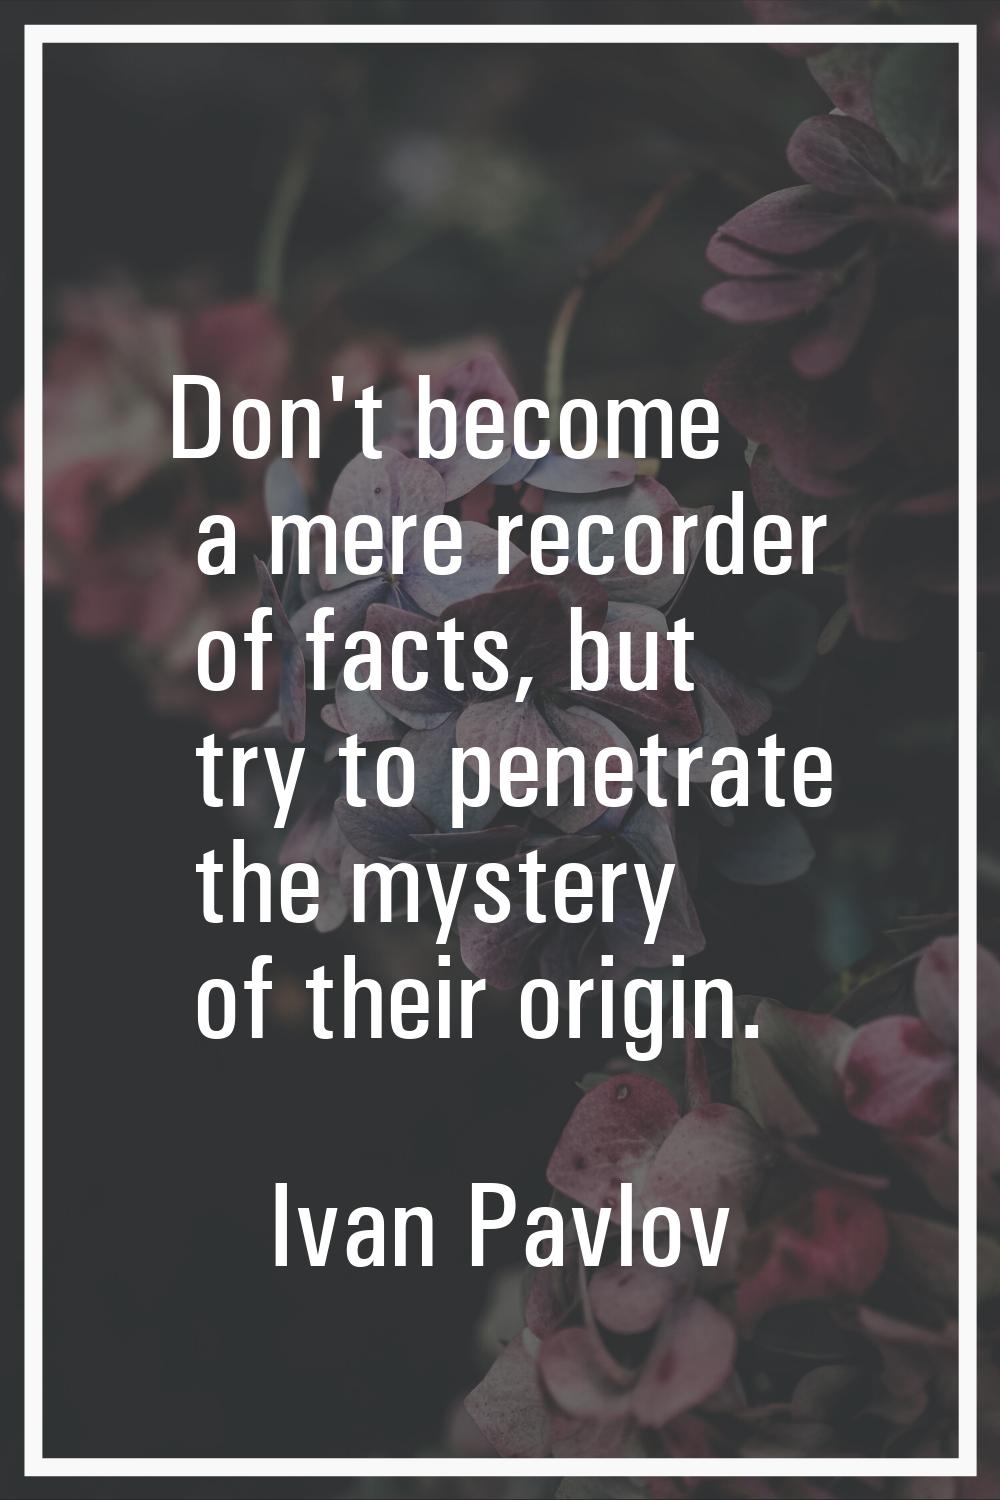 Don't become a mere recorder of facts, but try to penetrate the mystery of their origin.